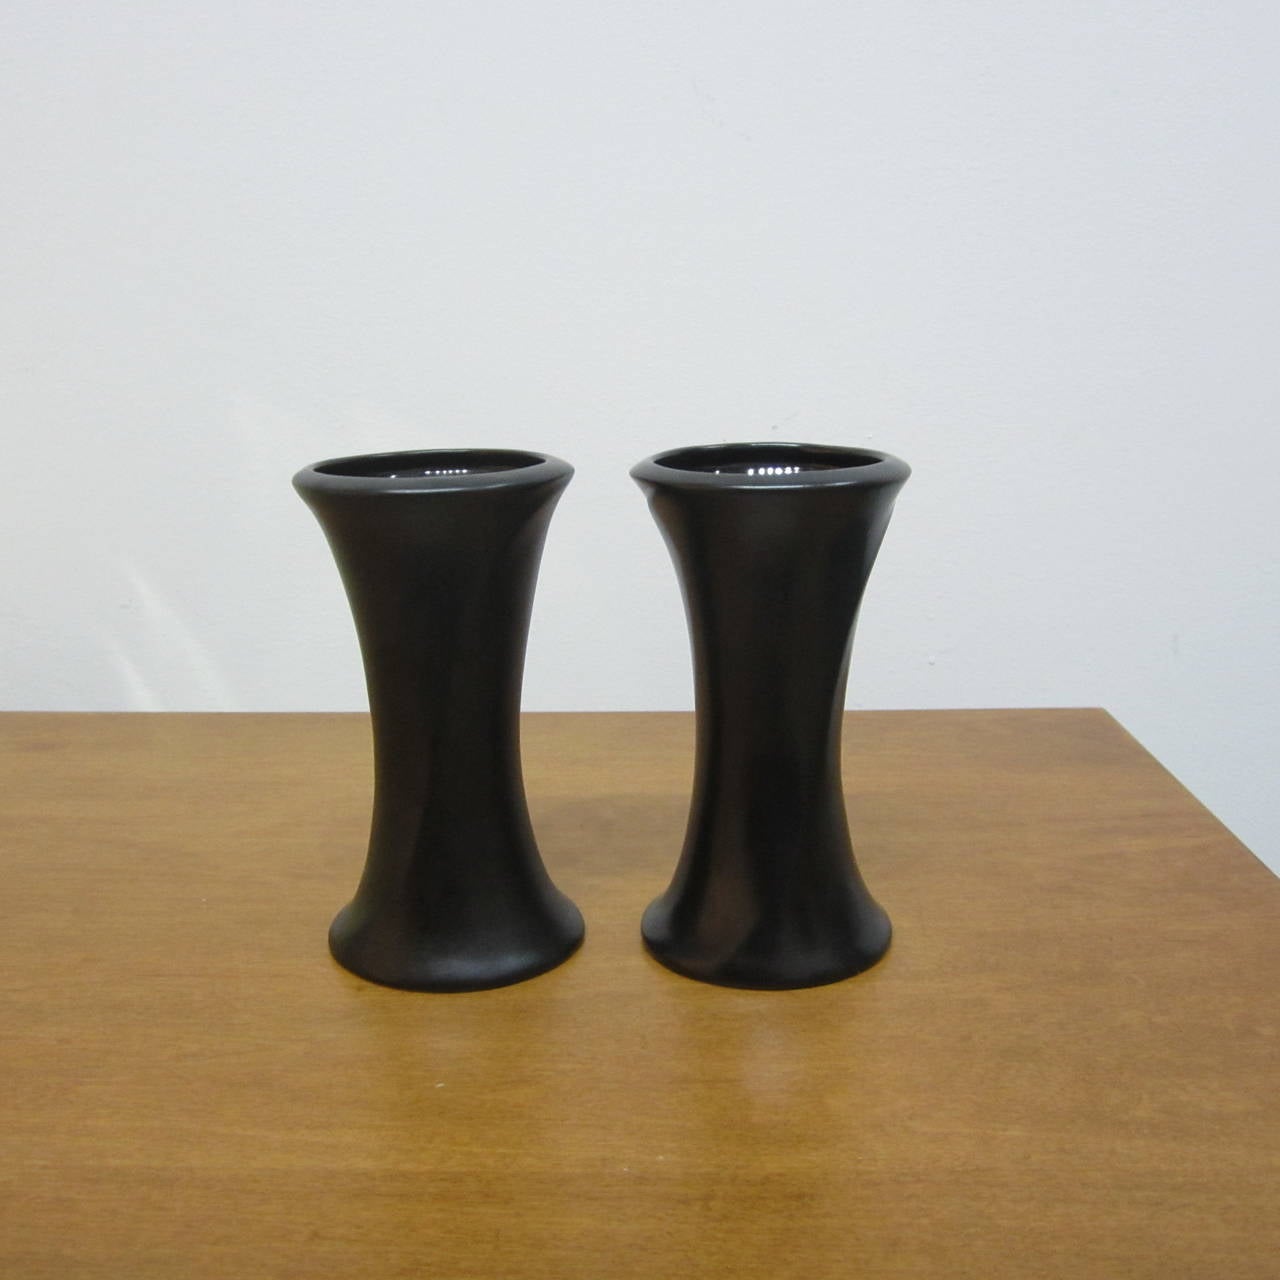 Pair of matte black ceramic vases designed by Elsa Peretti for Tiffany & Co made in Italy. Sold as a pair.